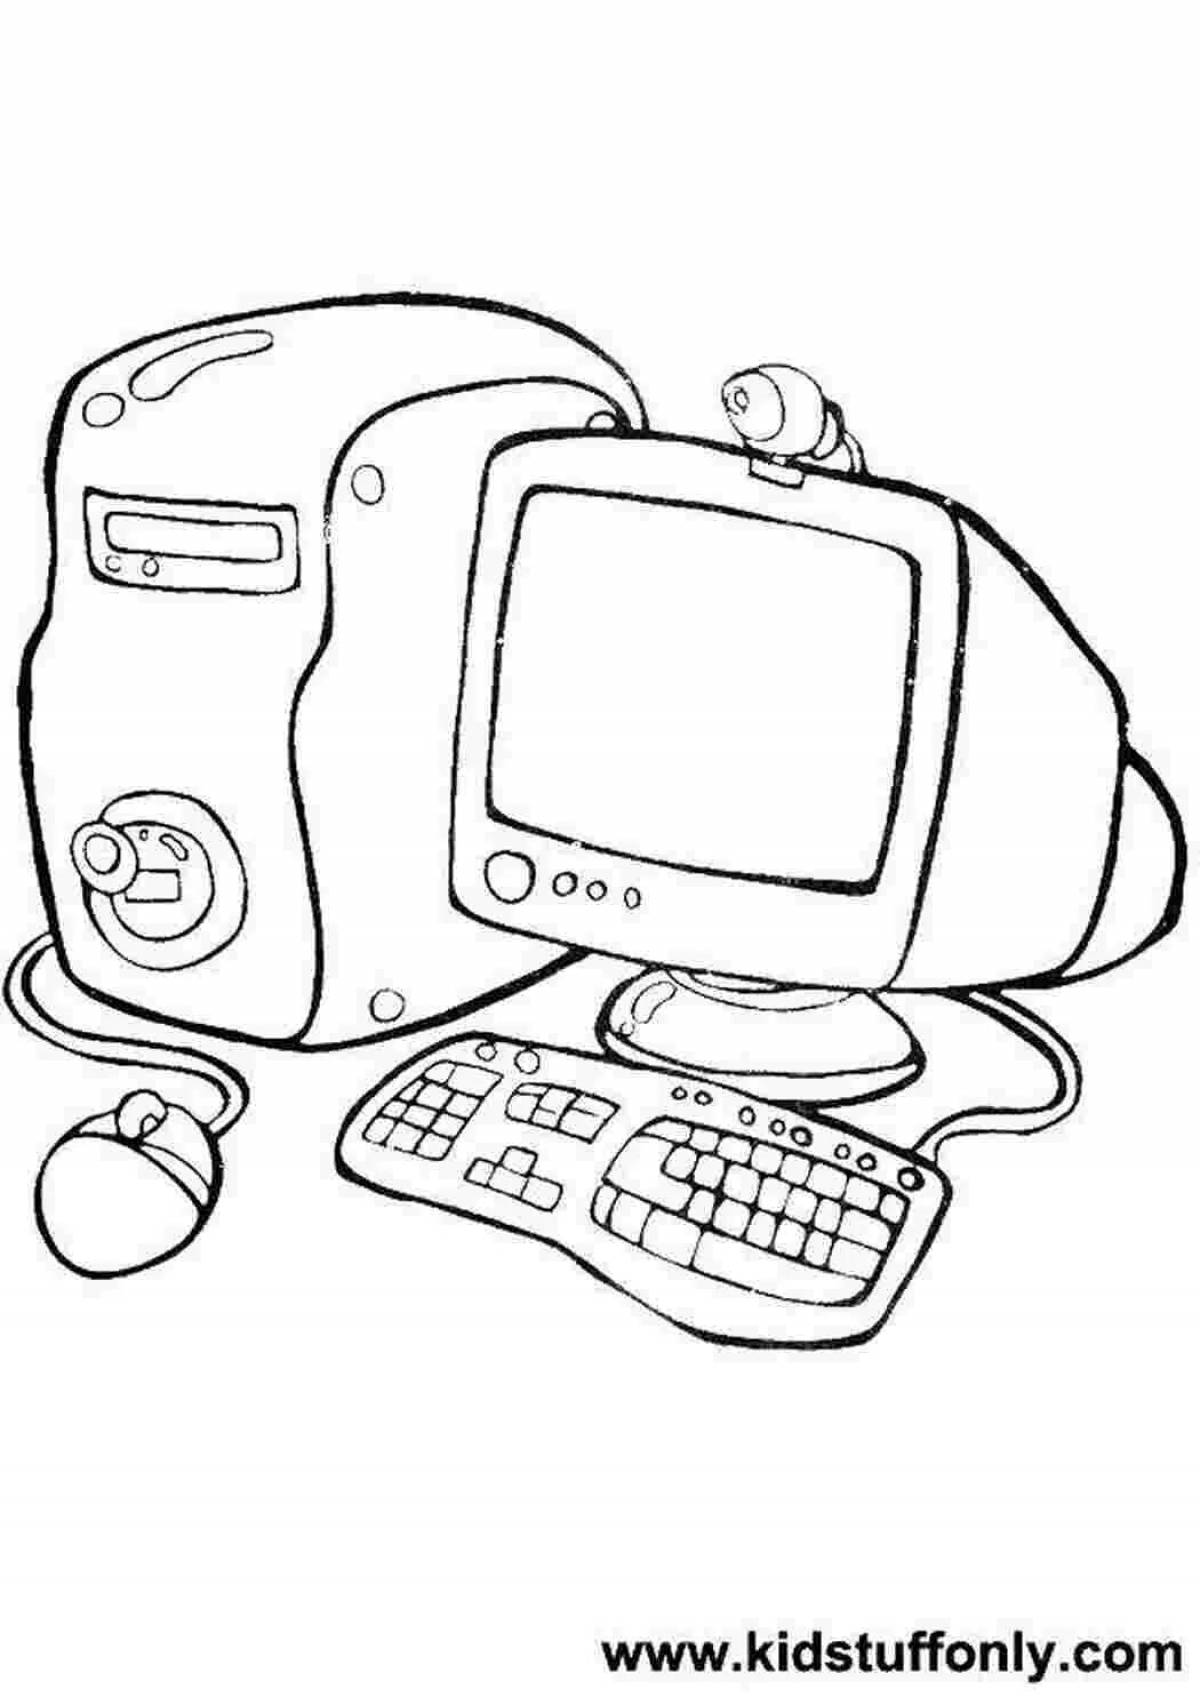 Computer and telephone coloring book